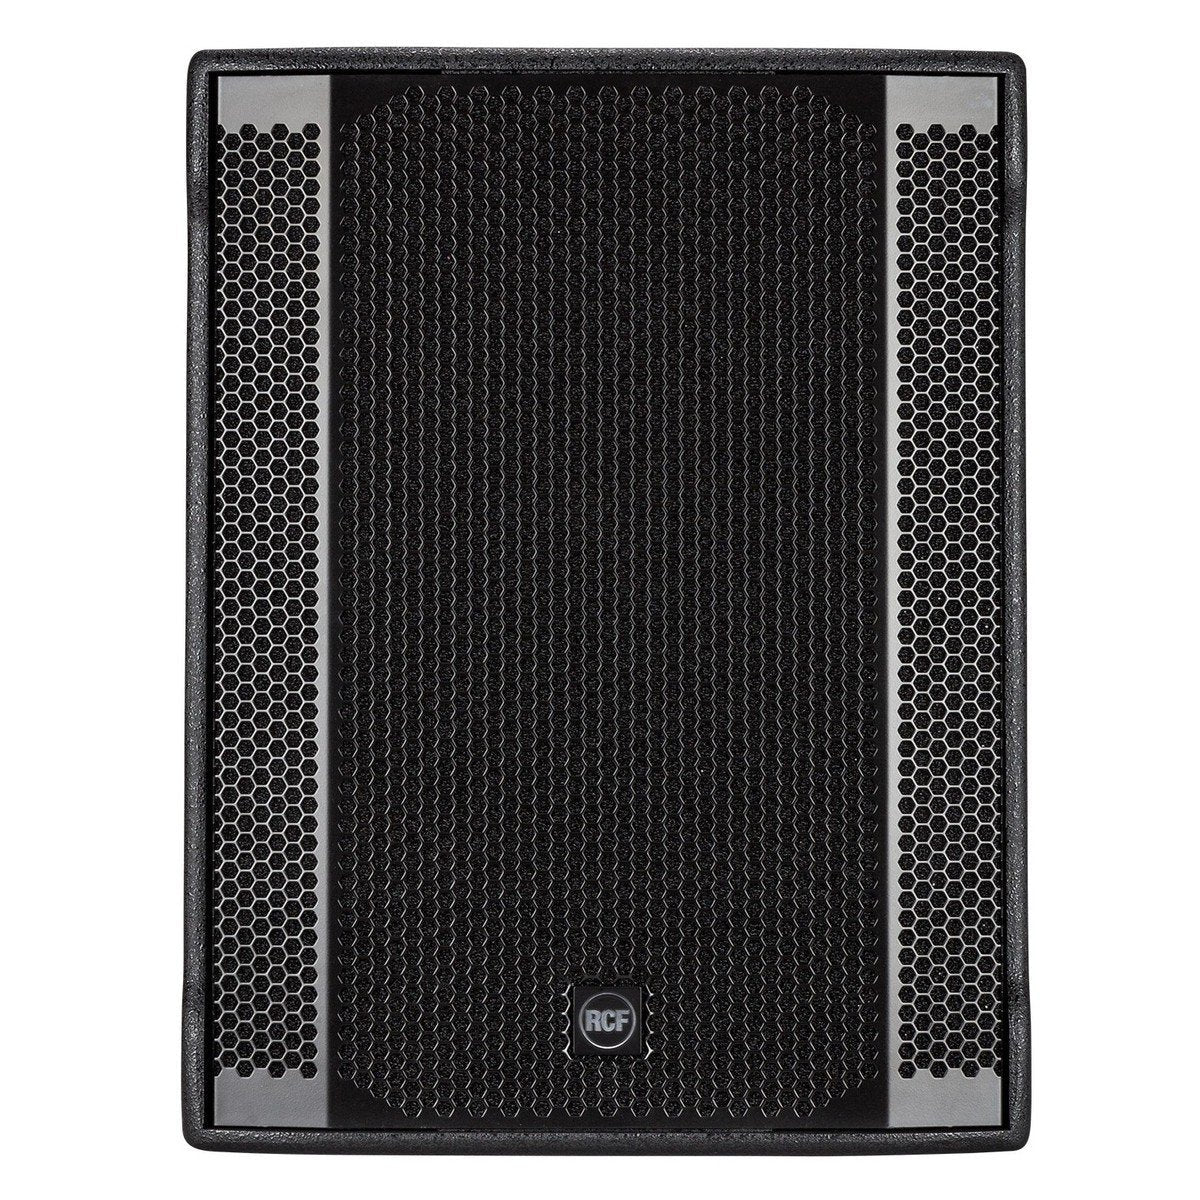 RCF SUB 708-AS II 18" Subwoofer - DY Pro Audio